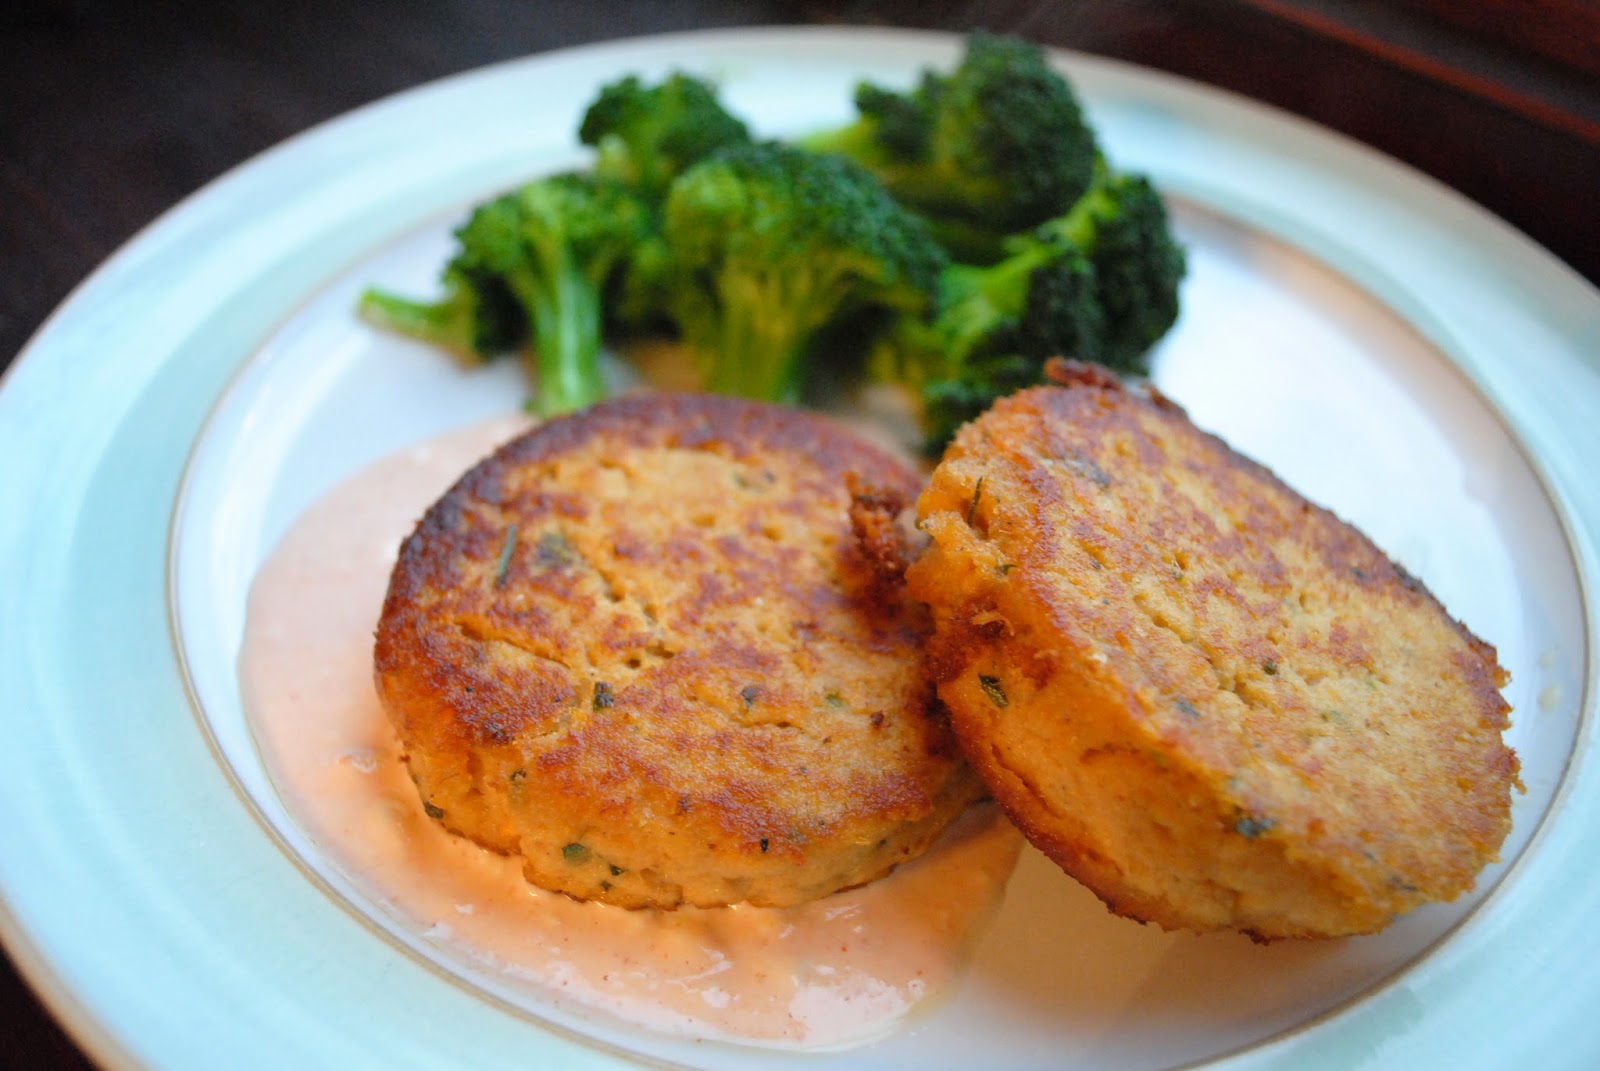 at home with ann: Salmon Cakes - Paleo and Delicious!